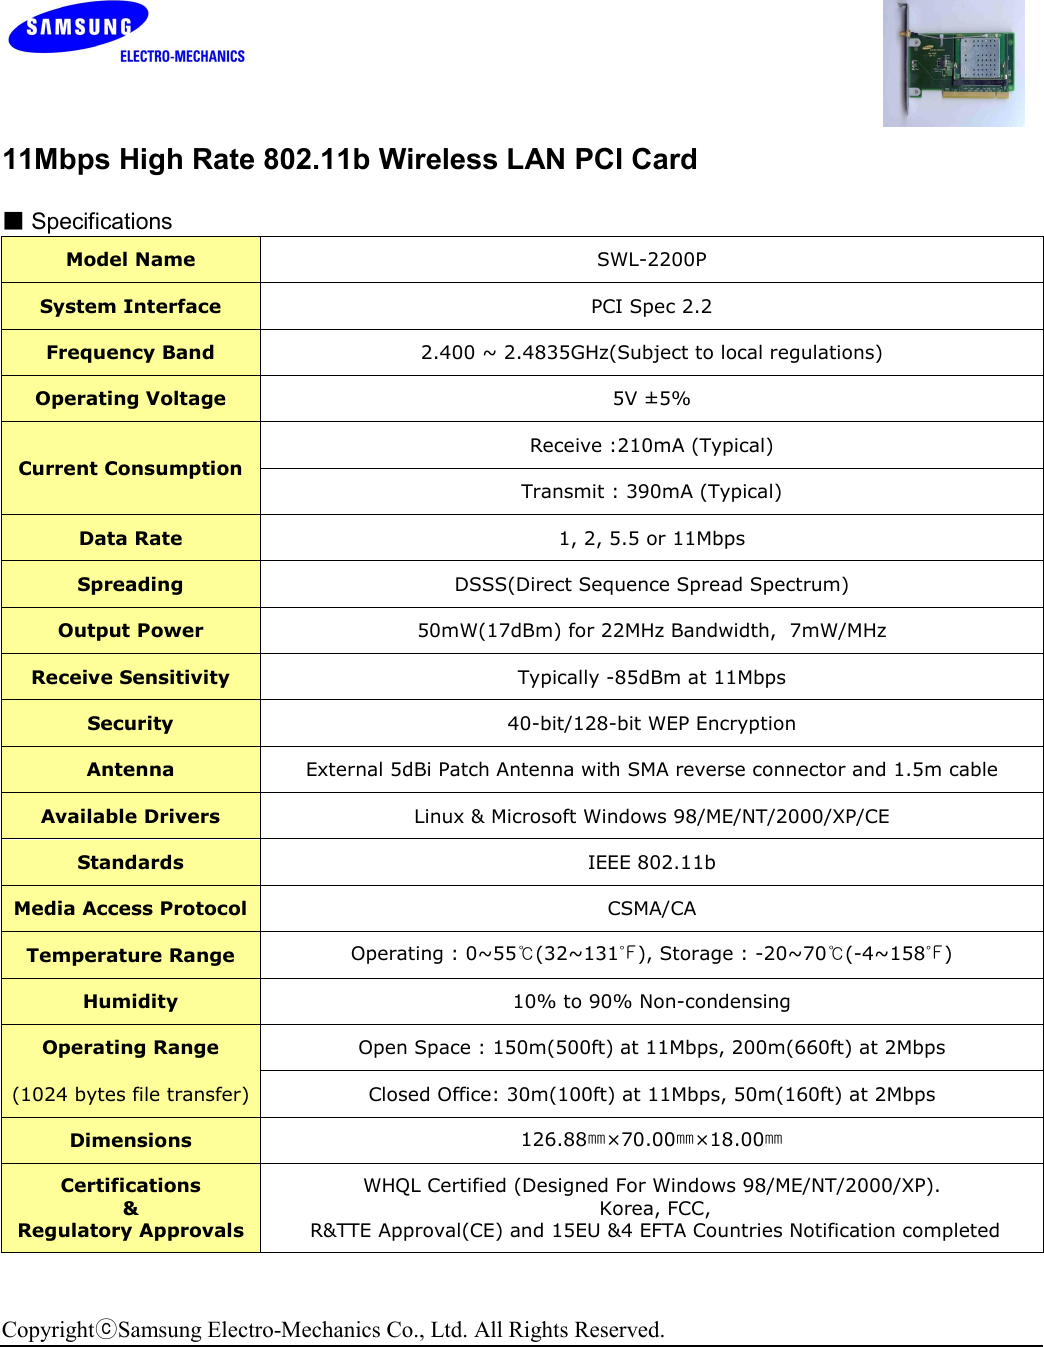         11Mbps High Rate 802.11b Wireless LAN PCI Card  ■ Specifications Model Name  SWL-2200P System Interface  PCI Spec 2.2 Frequency Band  2.400 ~ 2.4835GHz(Subject to local regulations) Operating Voltage  5V ±5%  Receive :210mA (Typical) Current Consumption Transmit : 390mA (Typical) Data Rate  1, 2, 5.5 or 11Mbps Spreading  DSSS(Direct Sequence Spread Spectrum) Output Power  50mW(17dBm) for 22MHz Bandwidth,  7mW/MHz Receive Sensitivity  Typically -85dBm at 11Mbps Security  40-bit/128-bit WEP Encryption Antenna  External 5dBi Patch Antenna with SMA reverse connector and 1.5m cable Available Drivers  Linux &amp; Microsoft Windows 98/ME/NT/2000/XP/CE  Standards  IEEE 802.11b Media Access Protocol  CSMA/CA Temperature Range  Operating : 0~55℃(32~131℉), Storage : -20~70℃(-4~158℉) Humidity  10% to 90% Non-condensing Operating Range  Open Space : 150m(500ft) at 11Mbps, 200m(660ft) at 2Mbps (1024 bytes file transfer)  Closed Office: 30m(100ft) at 11Mbps, 50m(160ft) at 2Mbps Dimensions  126.88㎜×70.00㎜×18.00㎜  Certifications &amp; Regulatory Approvals WHQL Certified (Designed For Windows 98/ME/NT/2000/XP).  Korea, FCC,  R&amp;TTE Approval(CE) and 15EU &amp;4 EFTA Countries Notification completed     CopyrightⓒSamsung Electro-Mechanics Co., Ltd. All Rights Reserved.    